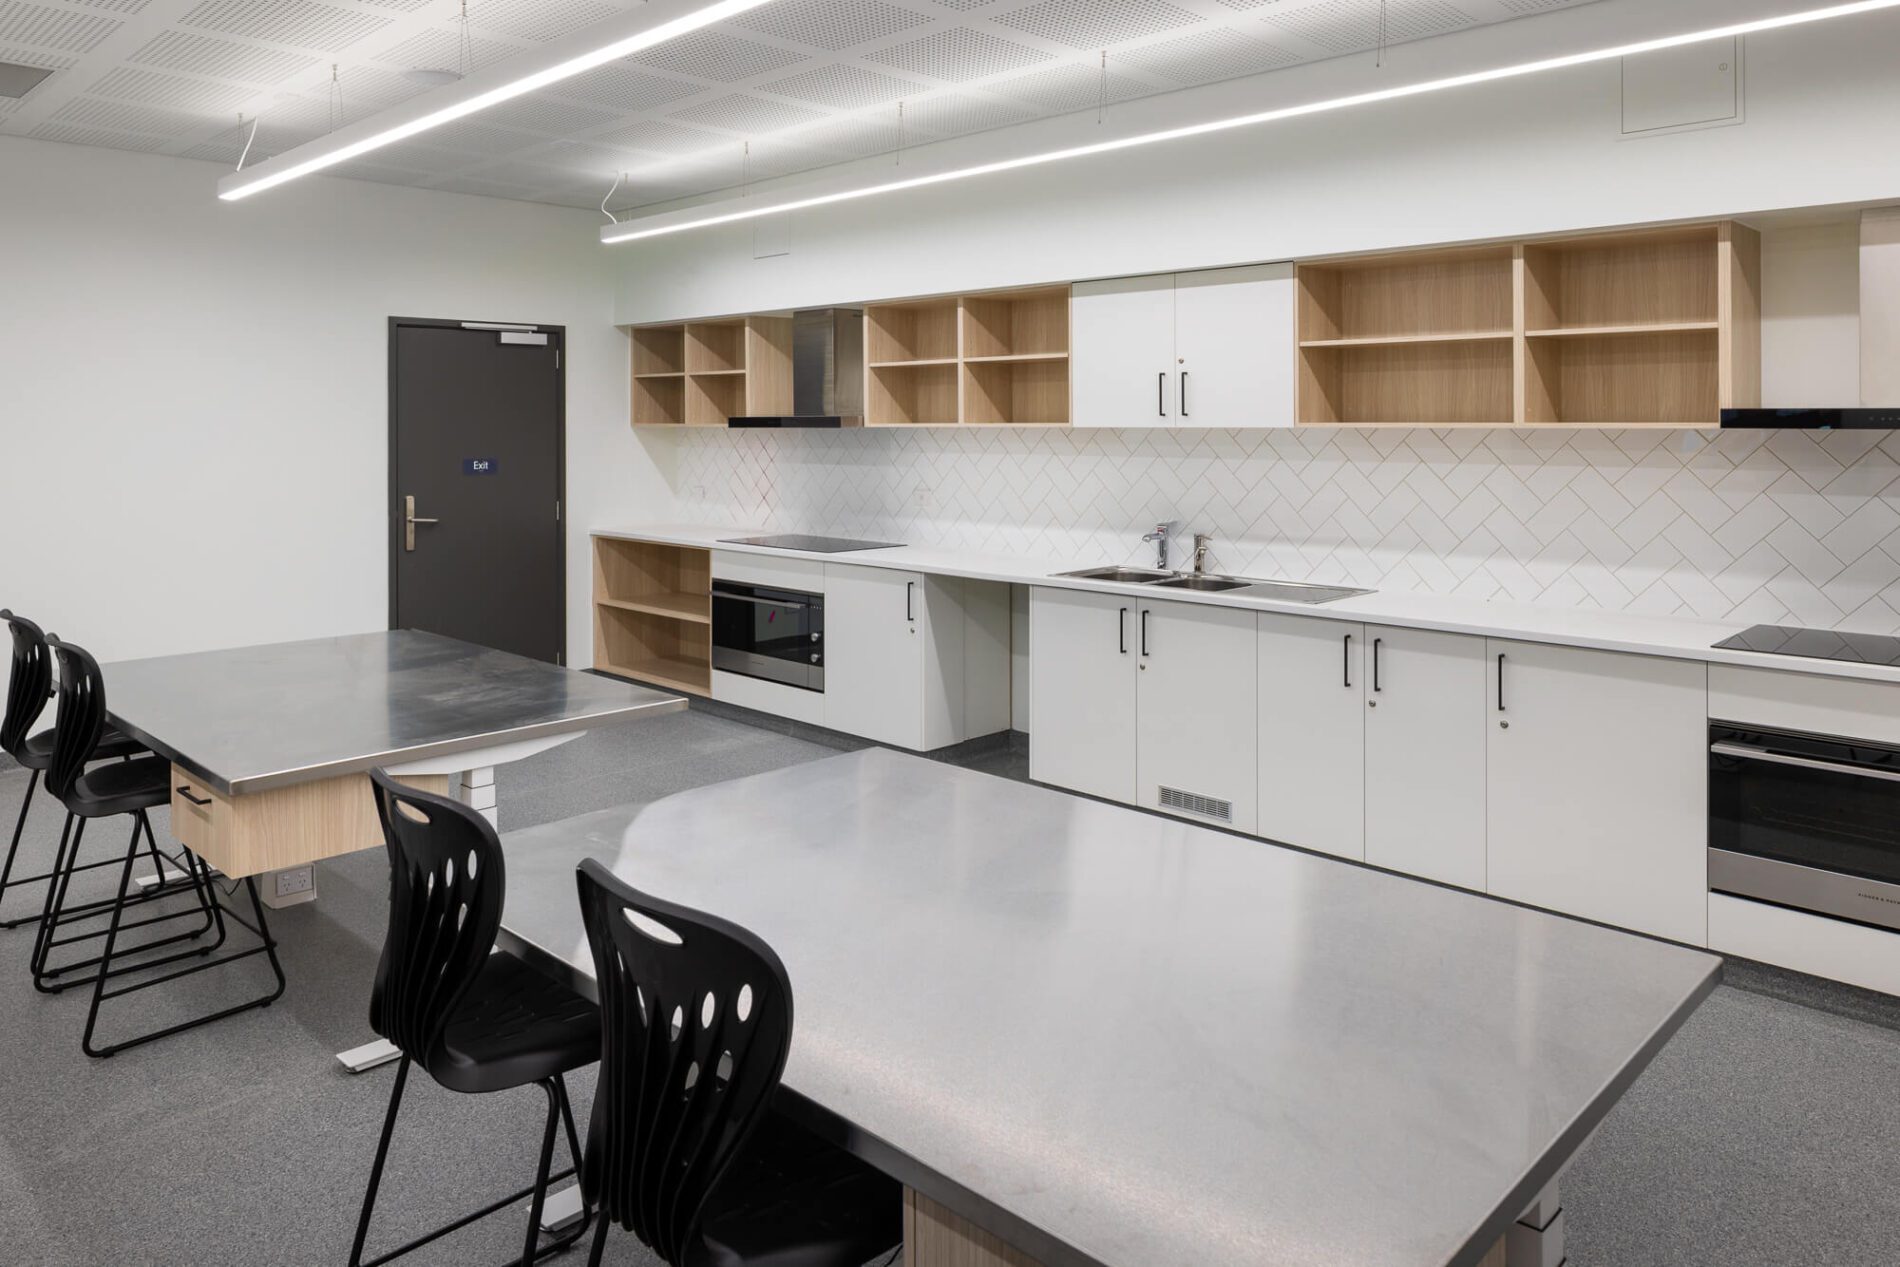 Kitchen space with stainless steel benches, white upboards, timber laminate shelving.